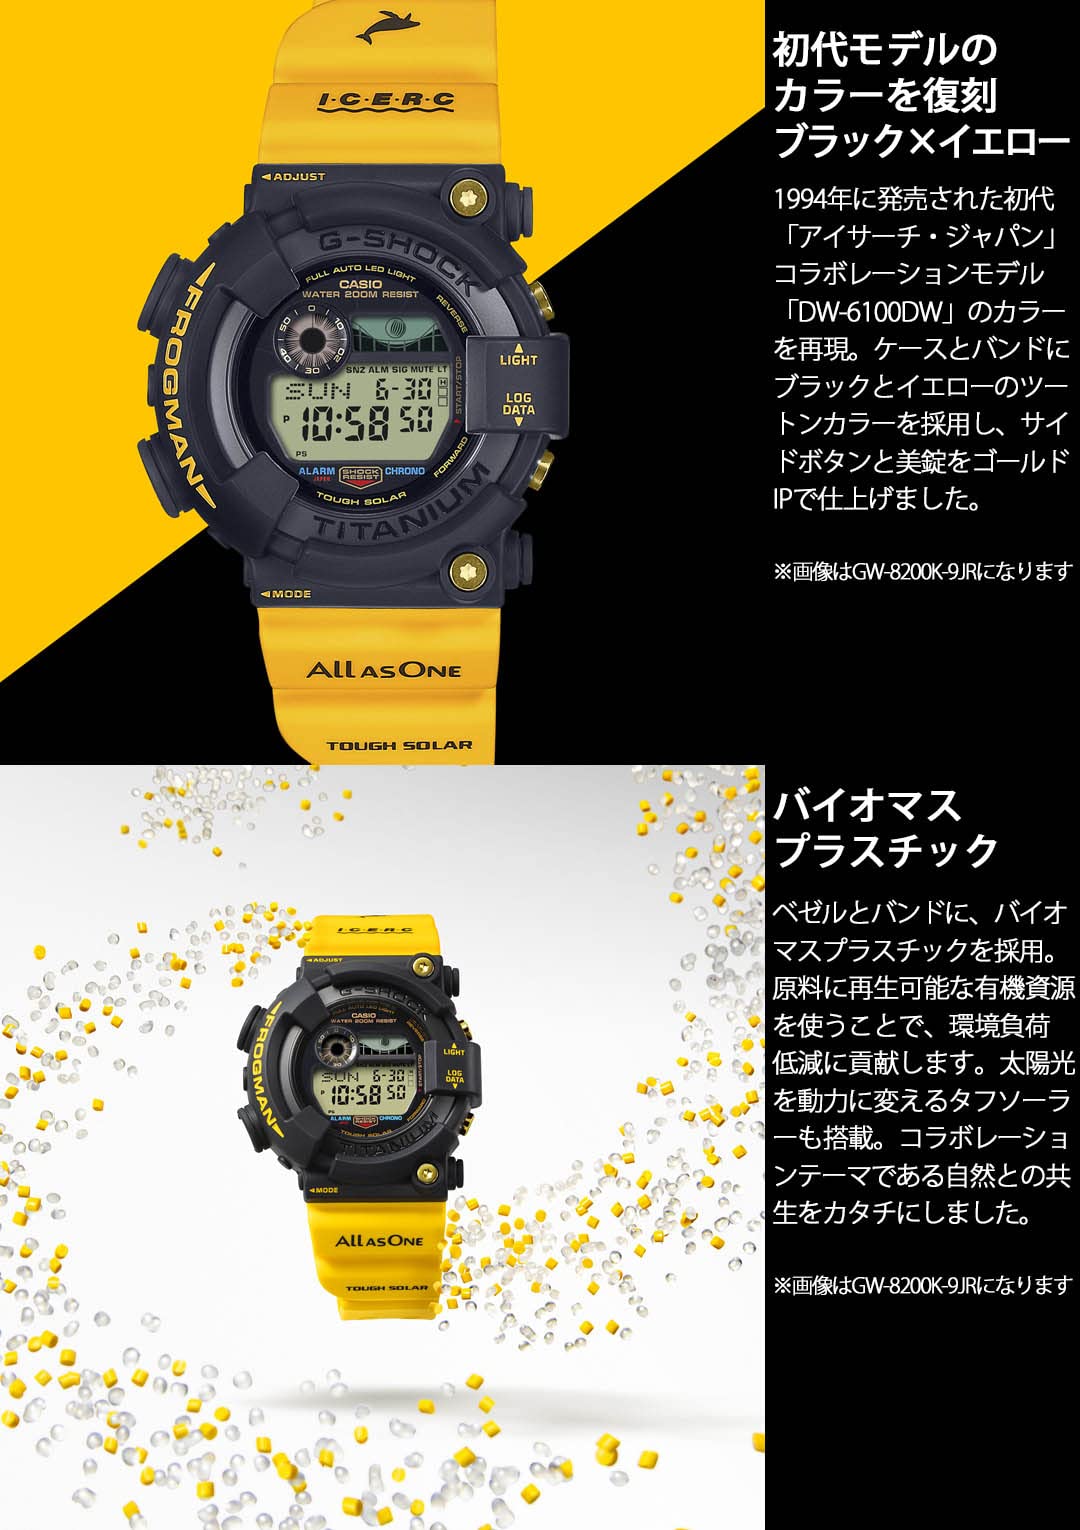 Casio GMD-W5600K-9JR GMD-W5600K-9JR Women's Watch, Love Sea and The Earth Collaboration Model, Biomass Plastic, Midsize Model, Yellow, yellow, Waterproof